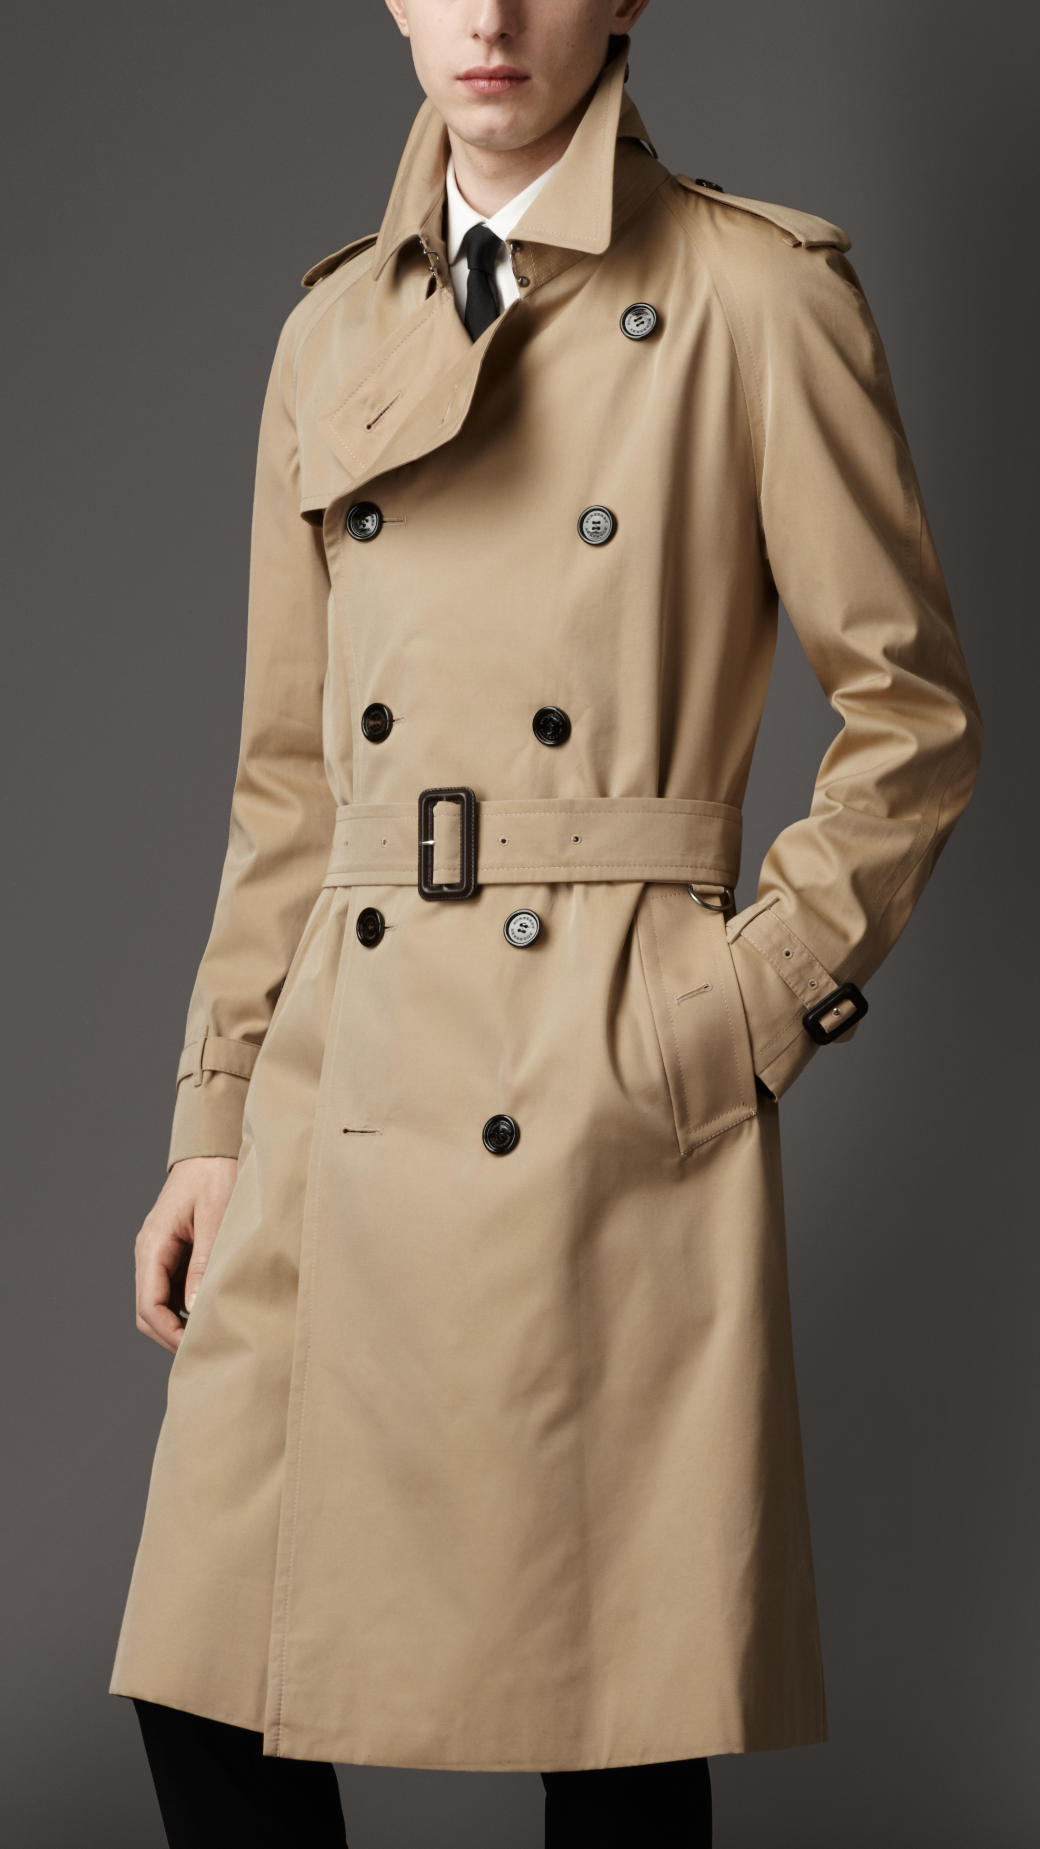 Lyst - Burberry Heritage Double Breasted Raglan Trench Coat in Natural ...